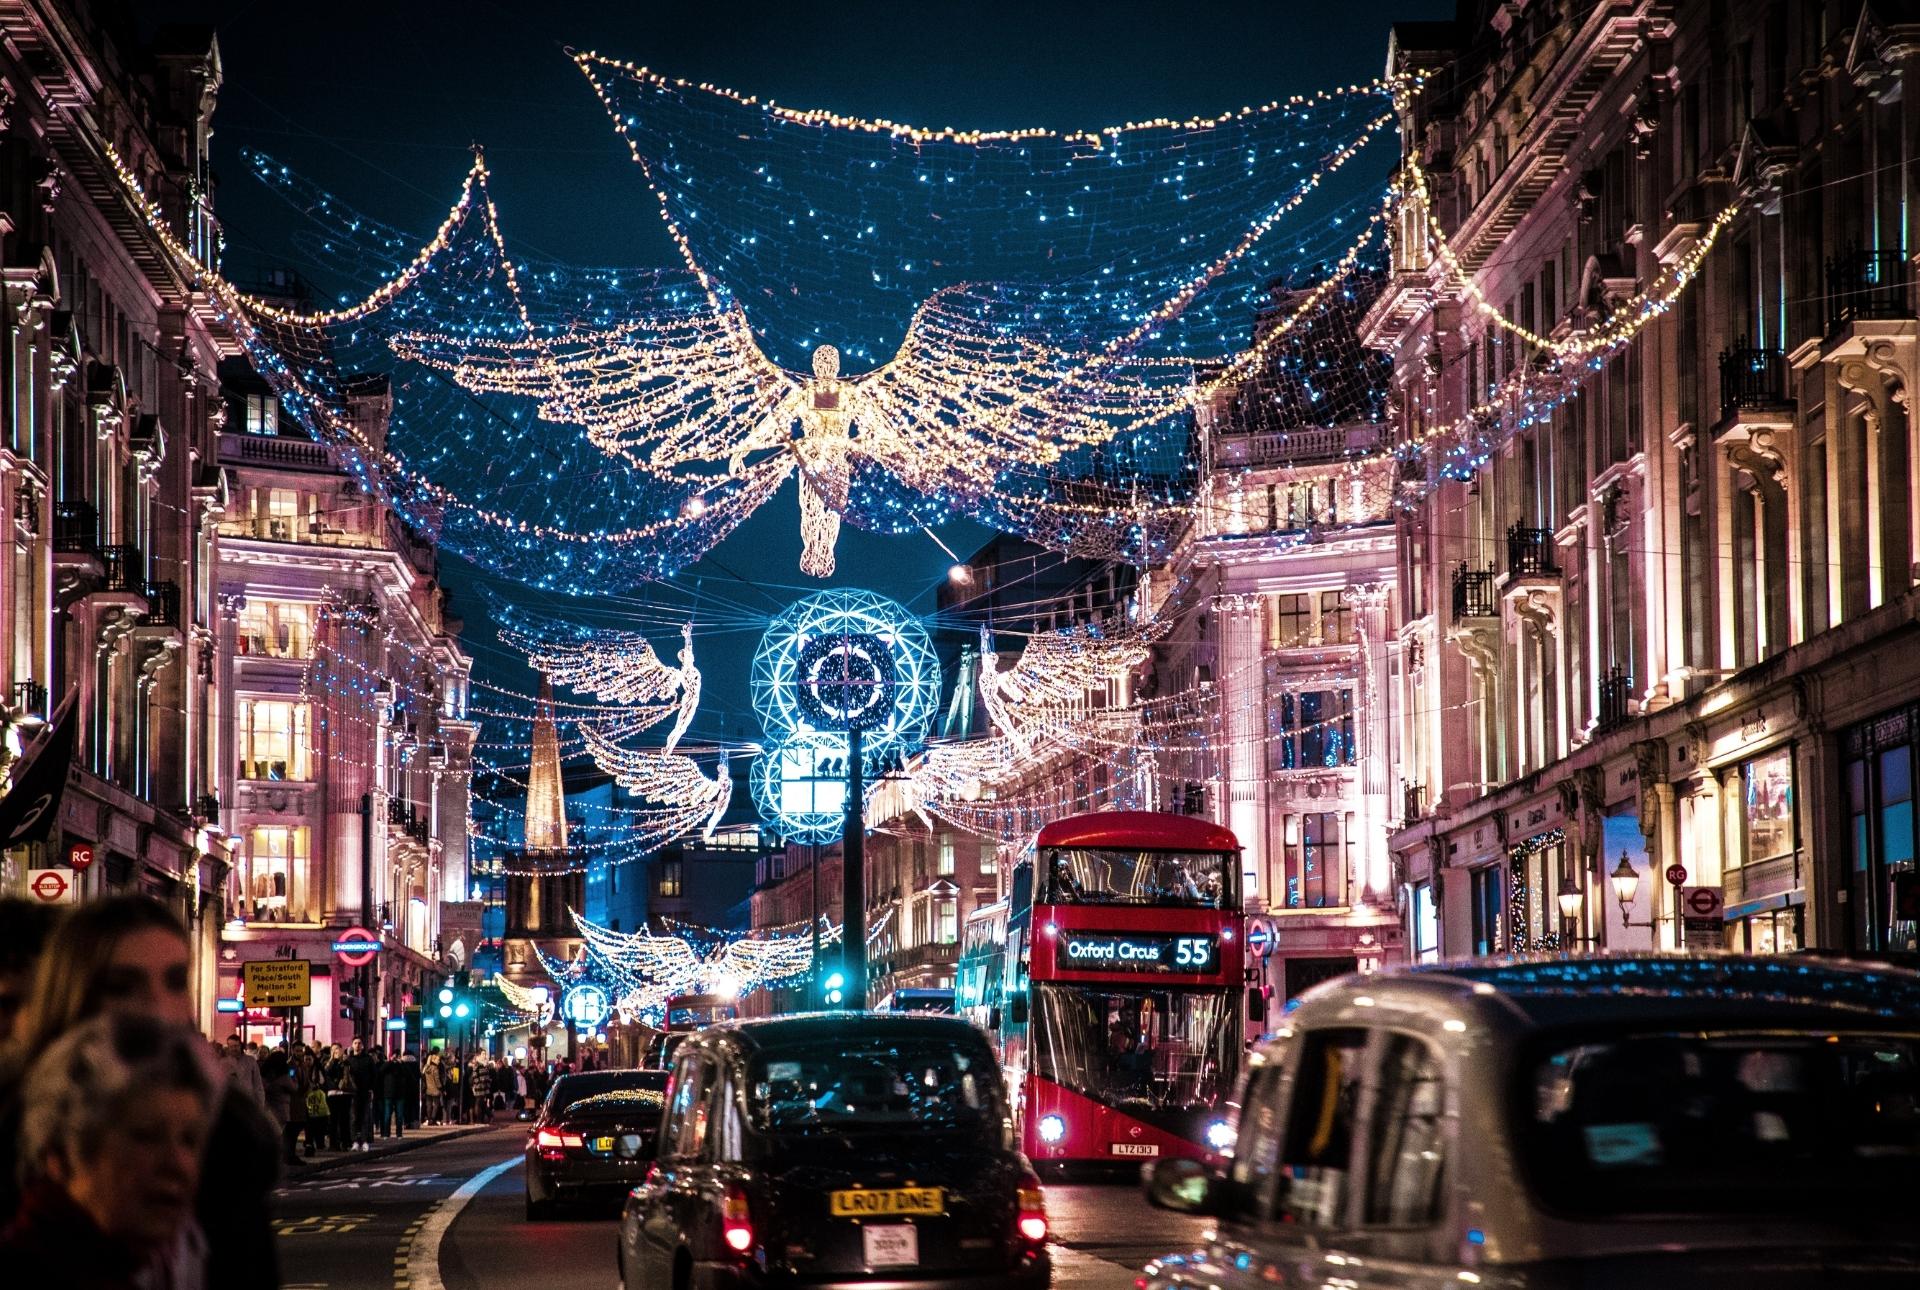 Top London Hotels to Stay at for Christmas Vibes